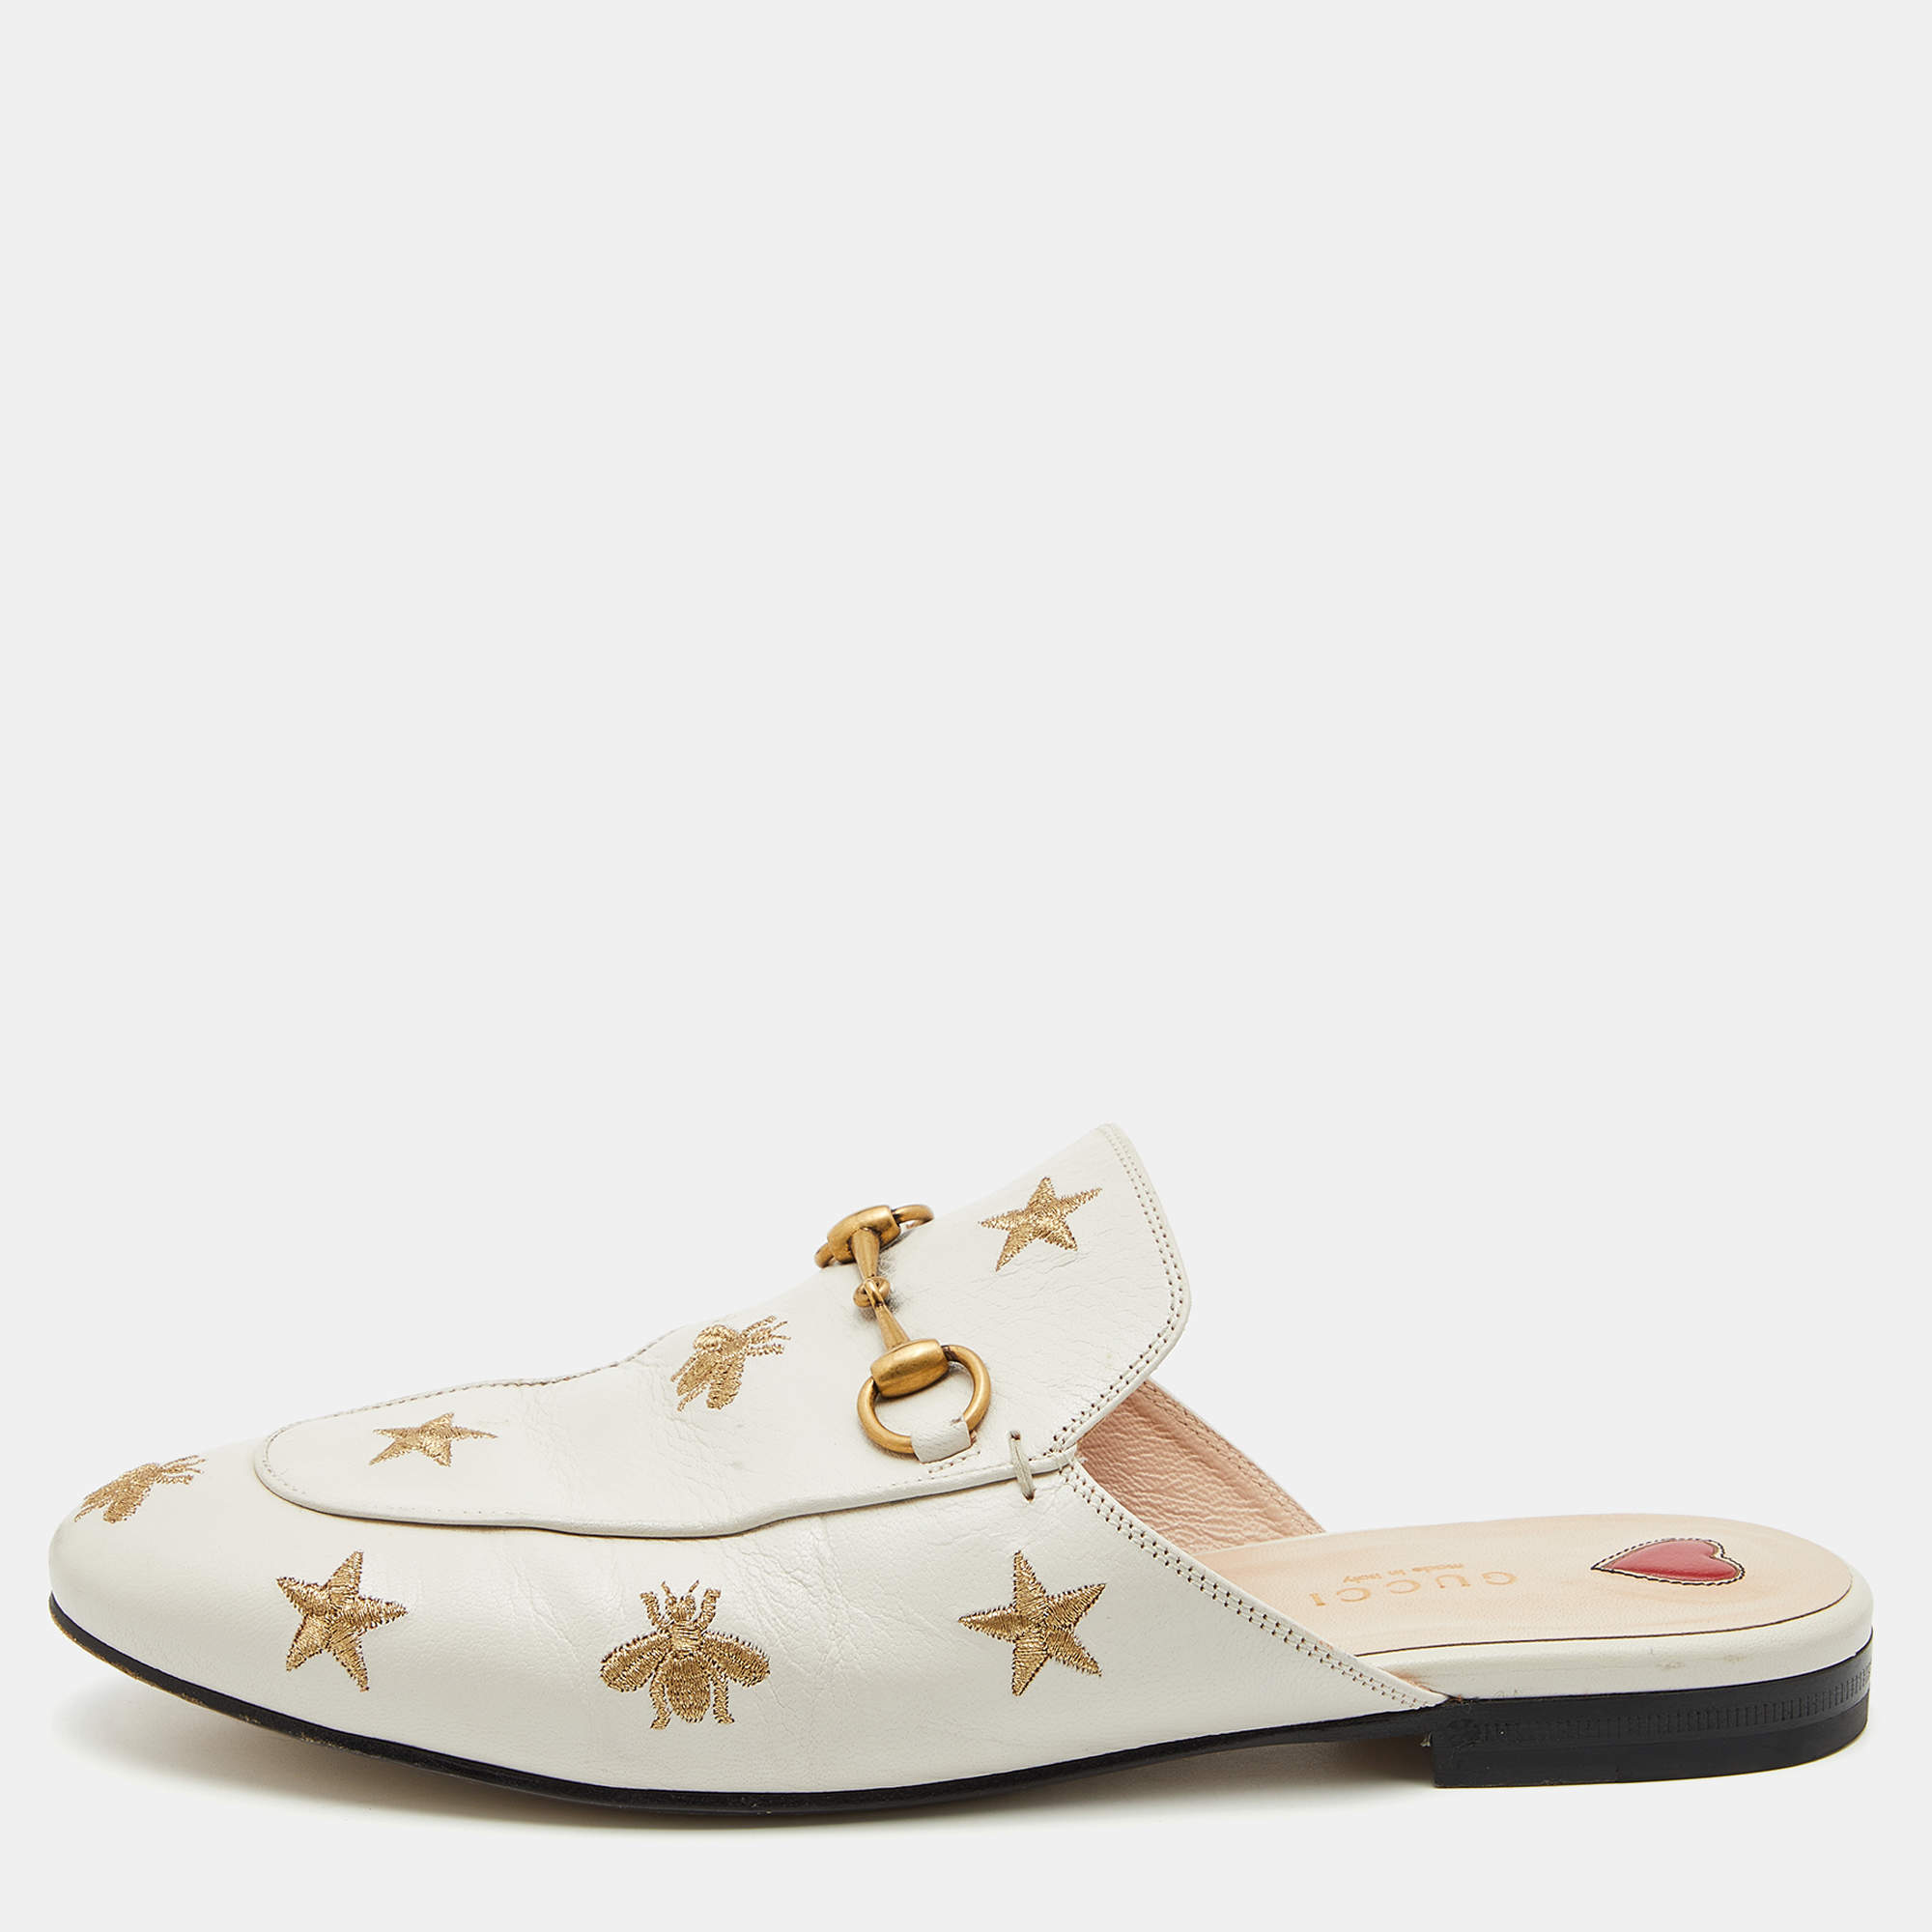 Gucci Cream Leather Bee and Star Embroidered Princetown Flat Mules Size 39